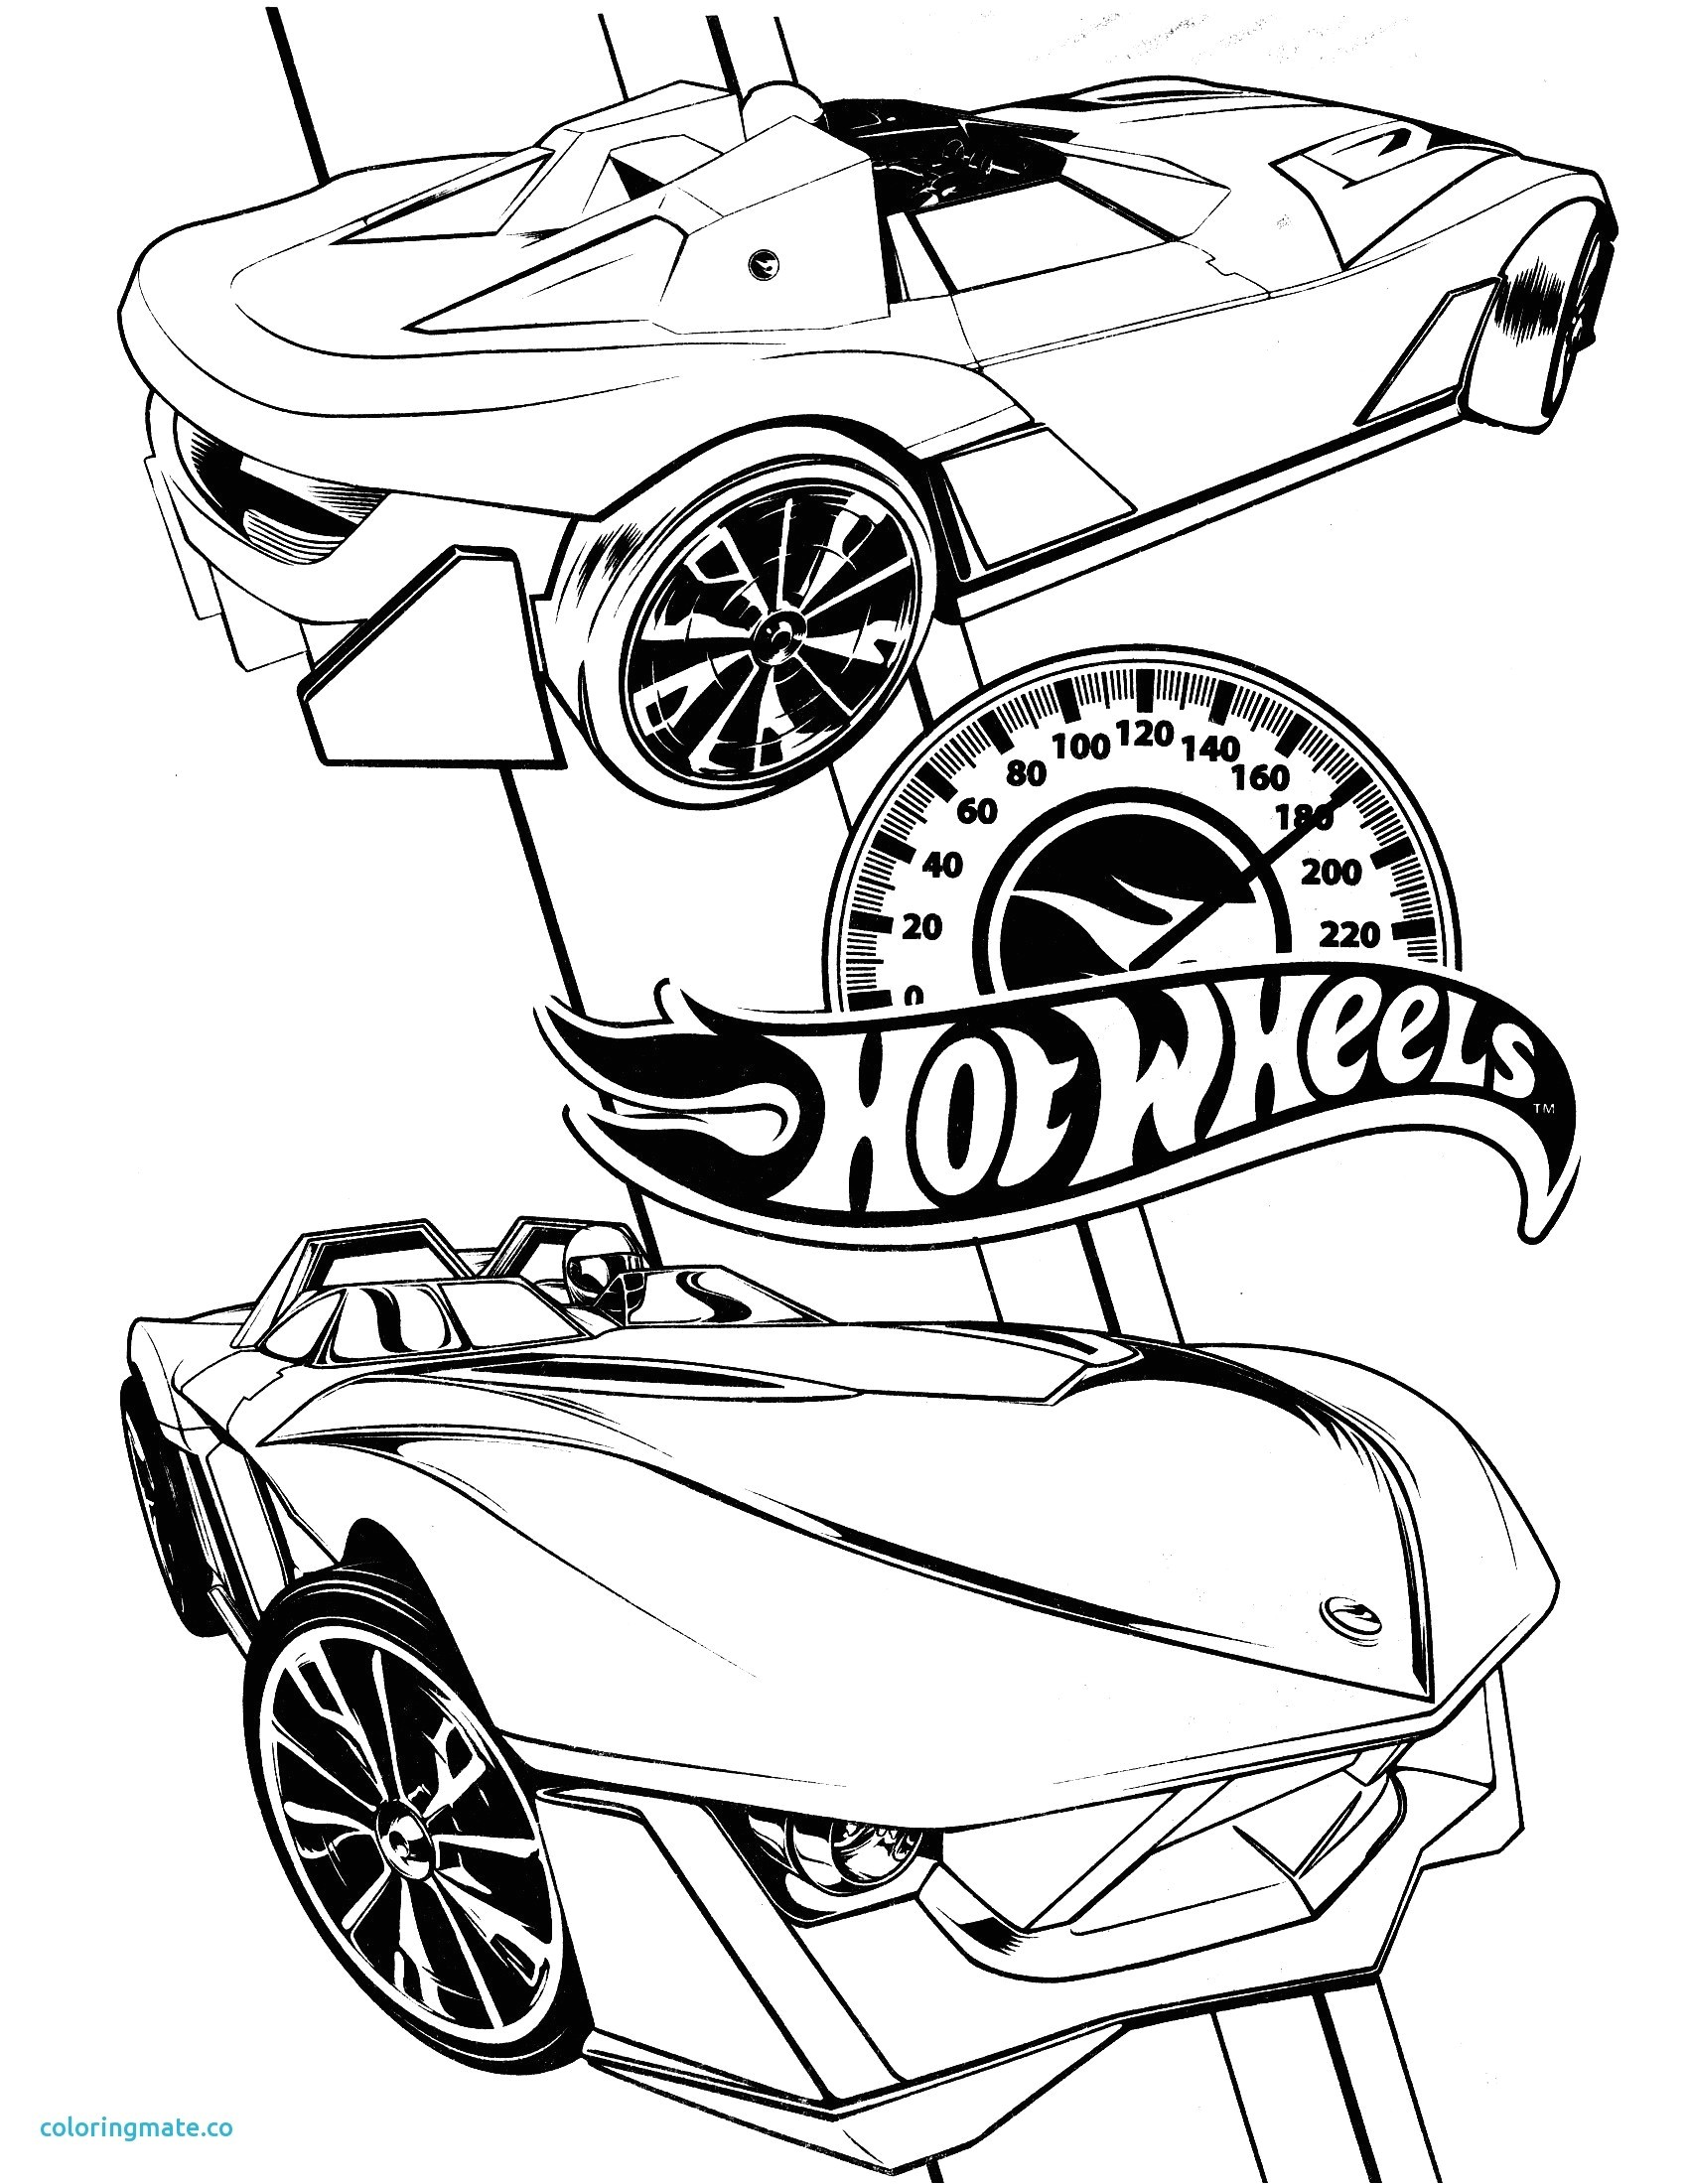 Hot Rod Coloring Pages to Print Best Hot Wheels Coloring Pages Elegant Inspiration Coloriage Francesco